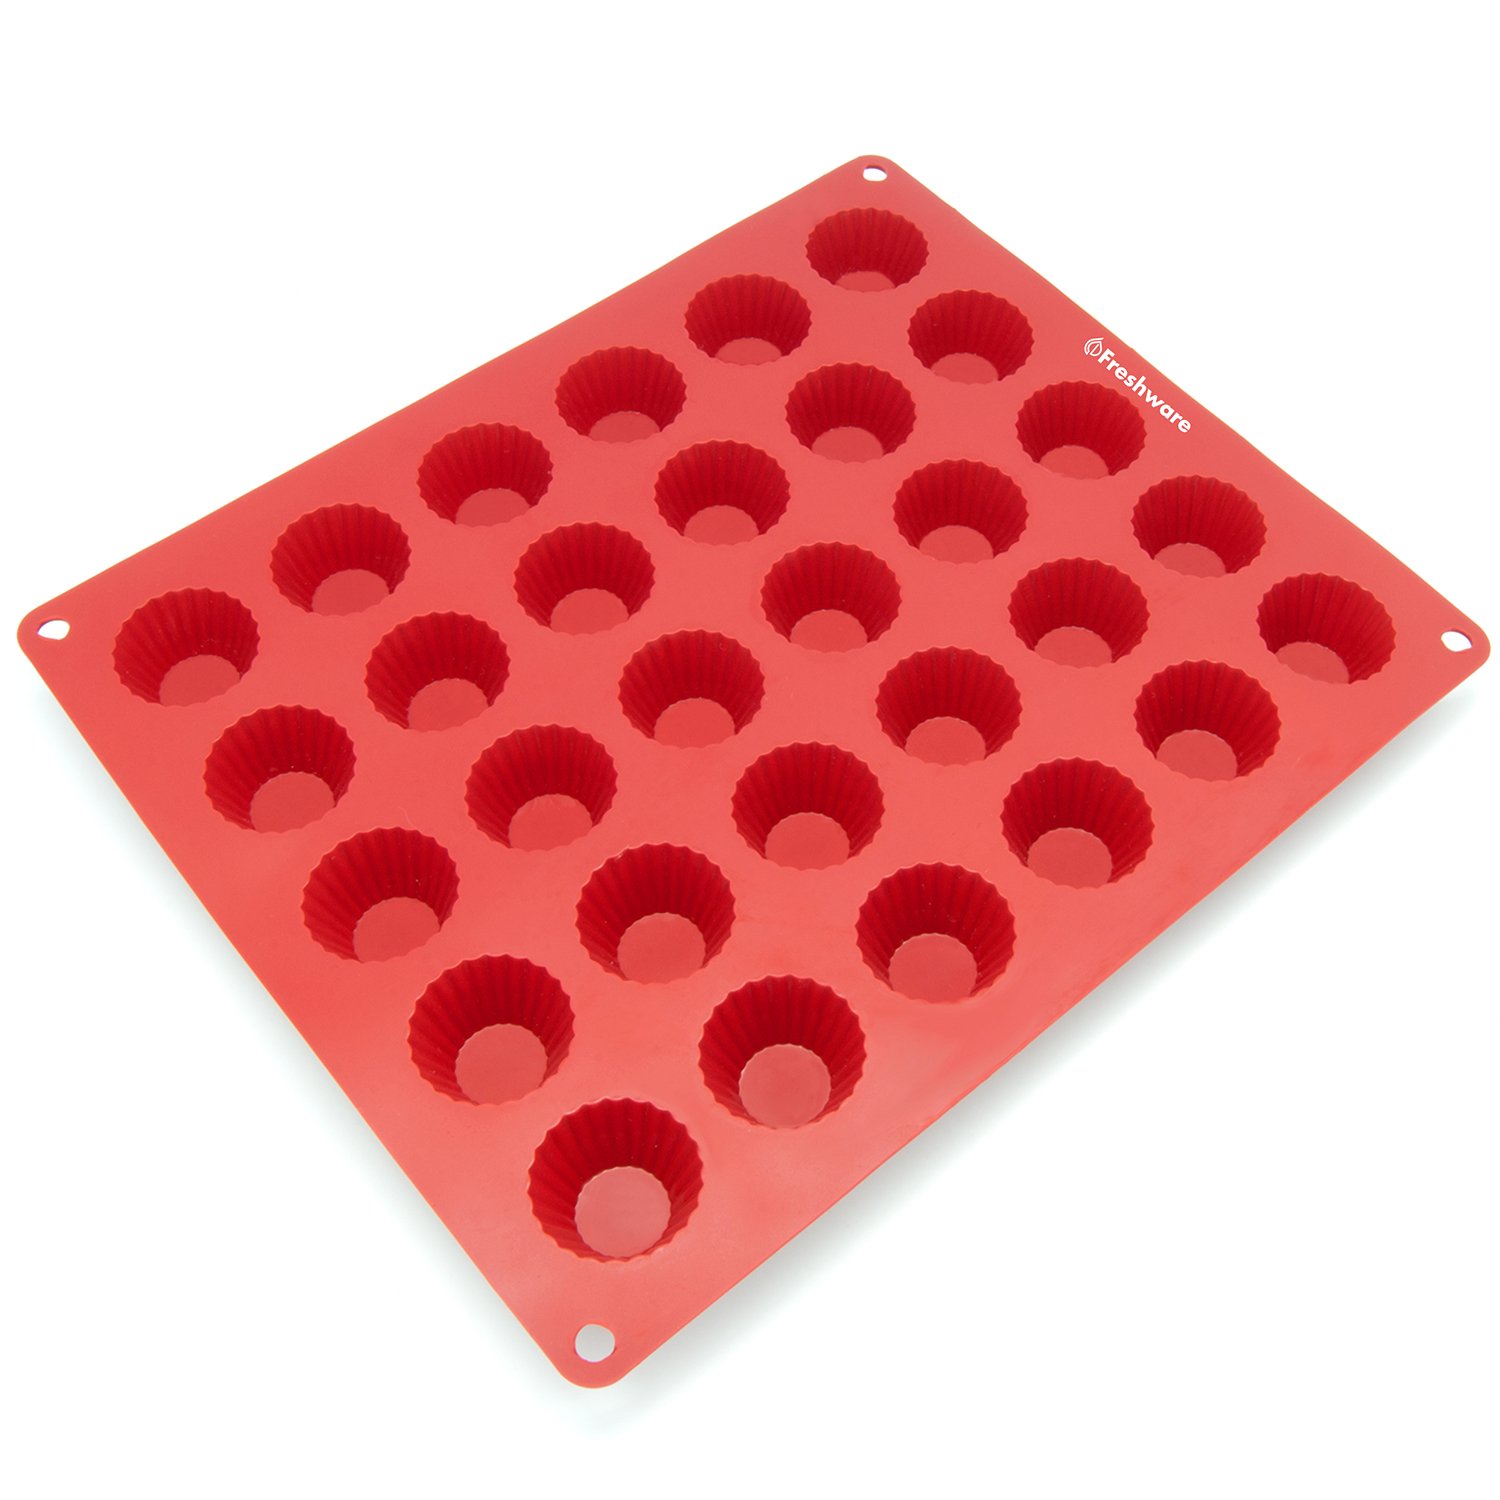 Silicone Chocolate Candy Molds - Non Stick, BPA Free, Reusable 100% Silicon & Dishwasher Safe Silicon - Kitchen Rubber Tray For Ice, Crayons, Fat Bombs and Soap Molds - image 2 of 3